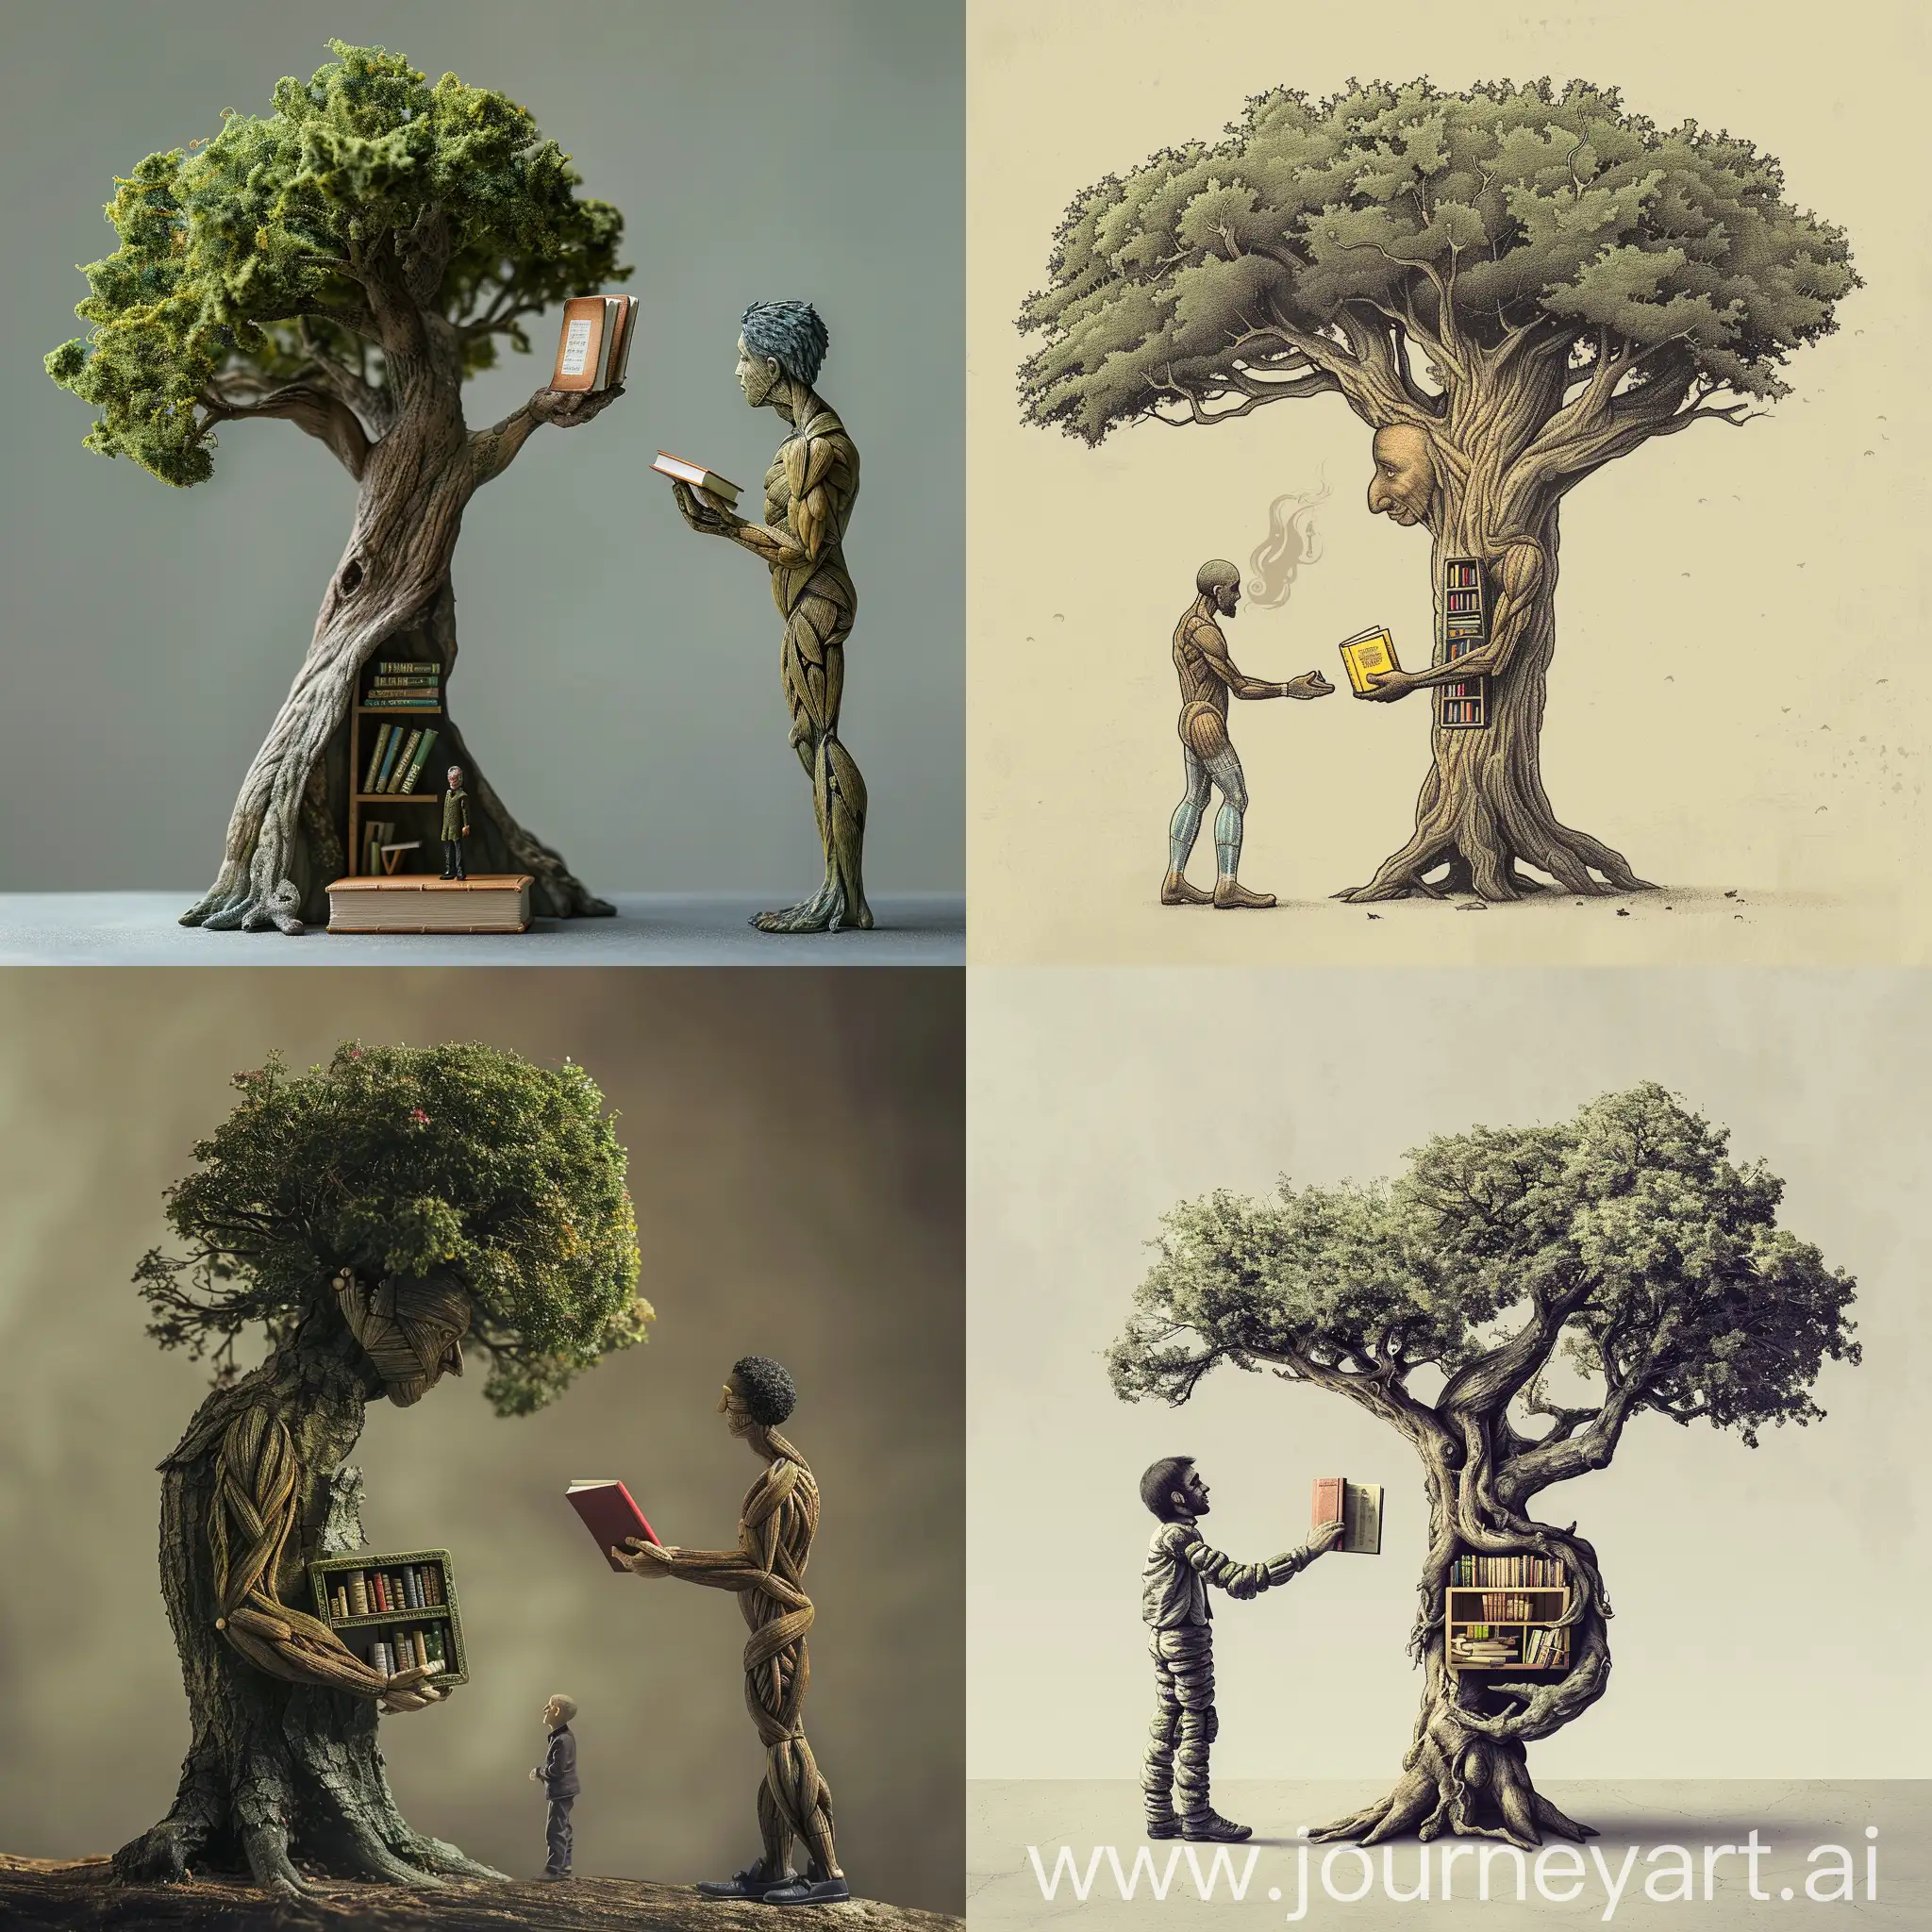 Enchanted-Tree-Offering-Knowledge-Book-to-Human